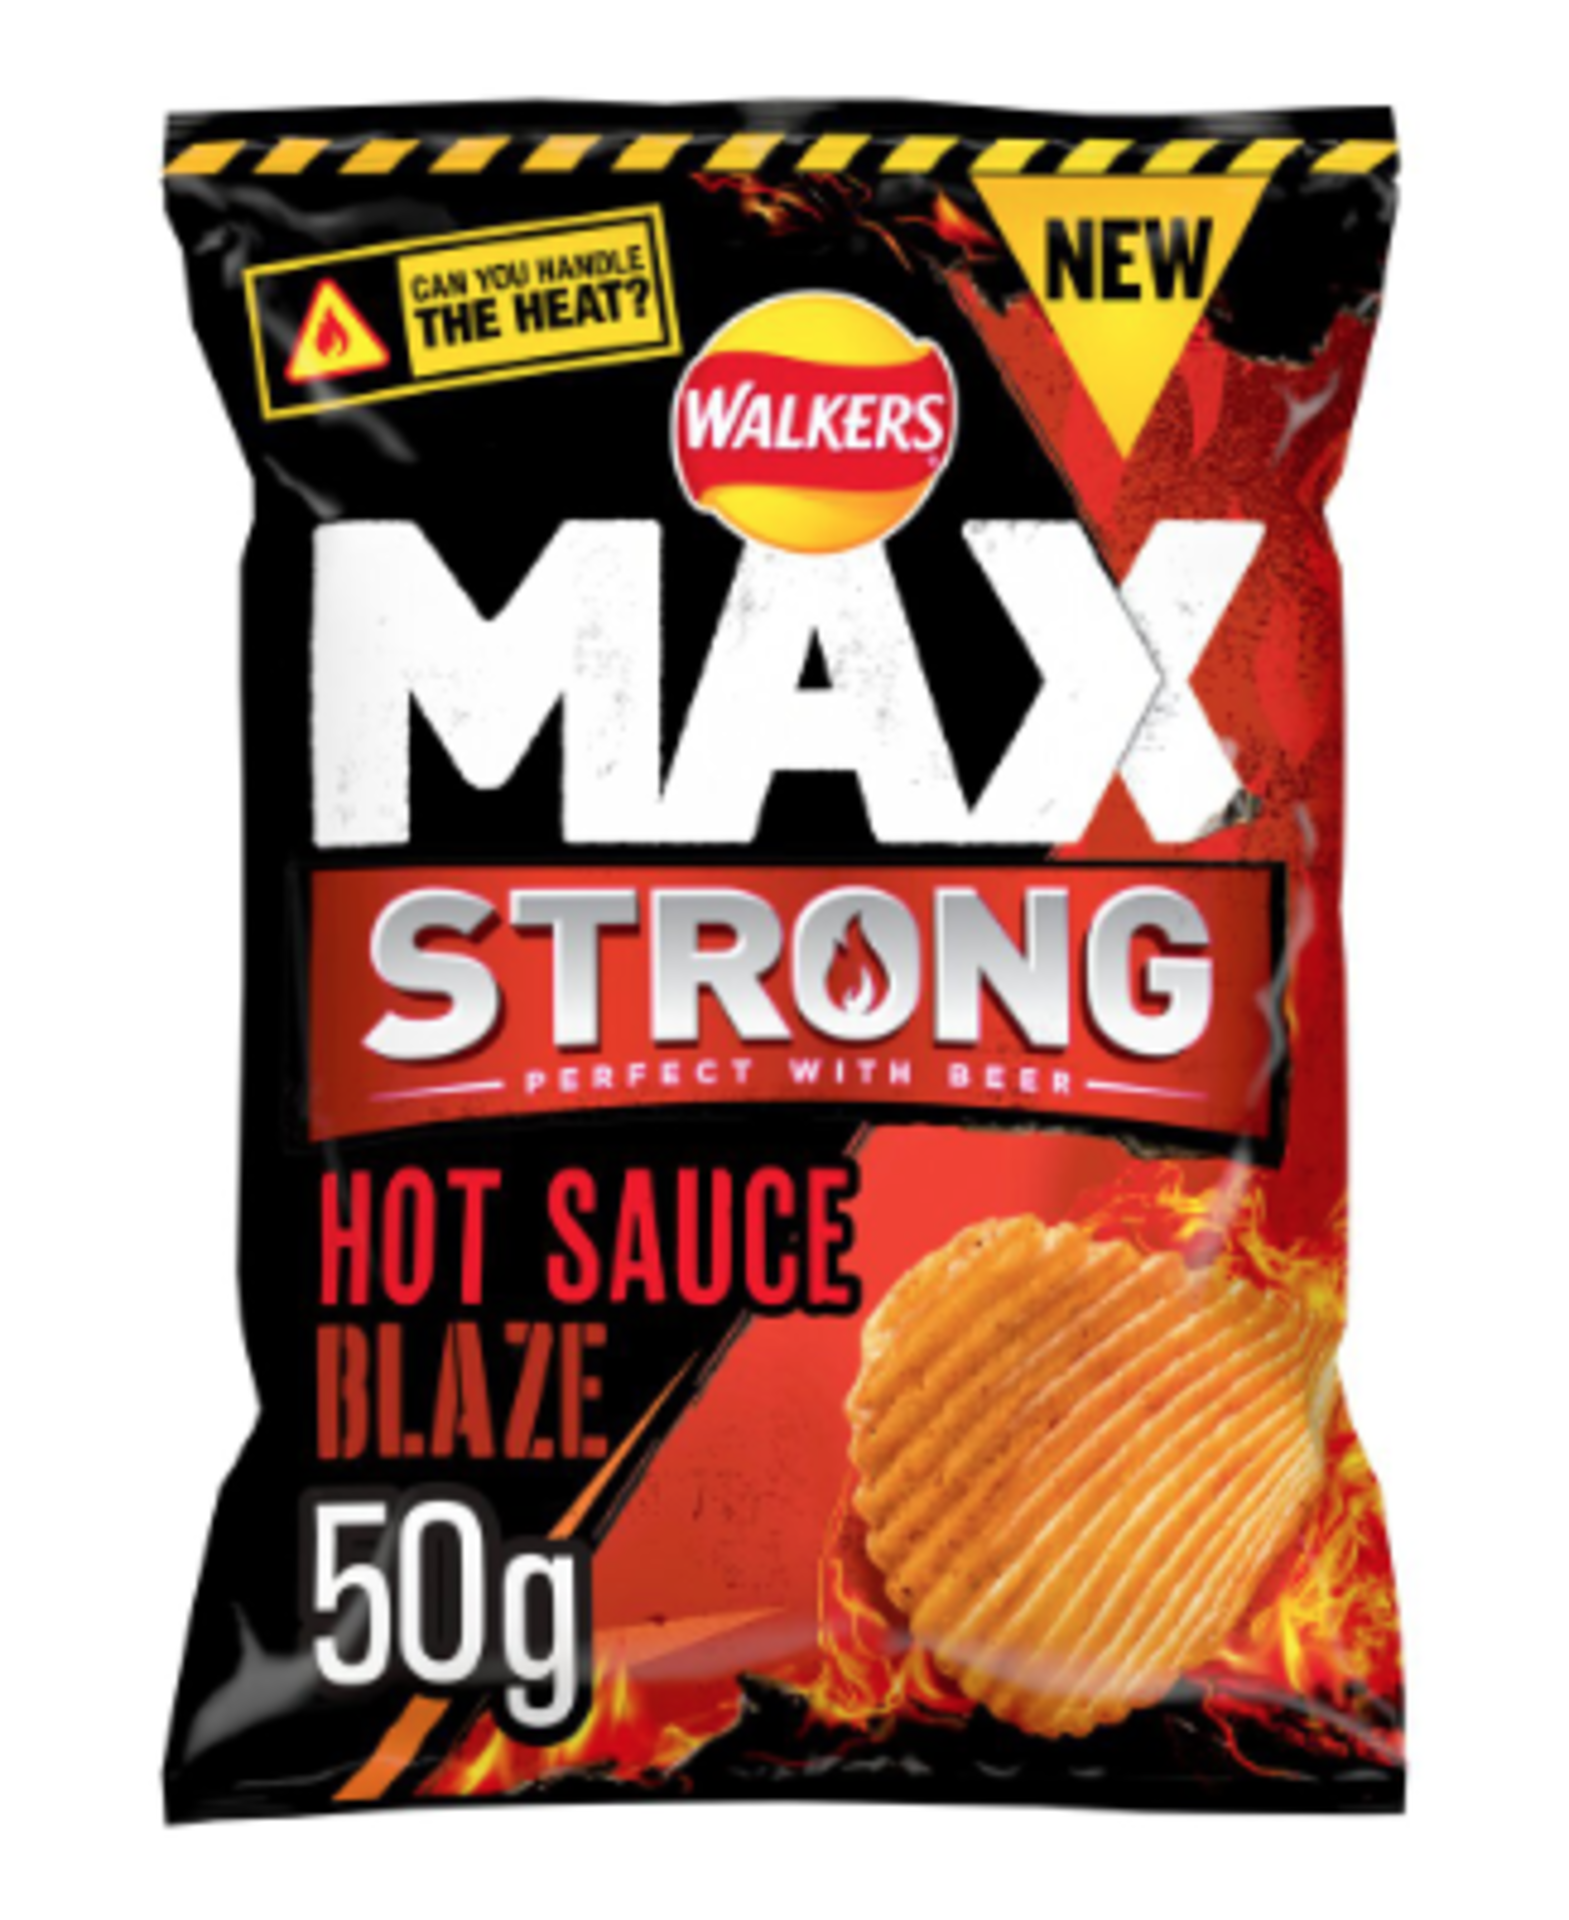 **RRP £1577 (Approx. Count 36) spSBG21c47T 19 x Walkers MAX STRONG Hot Sauce Blaze 50g (Case of